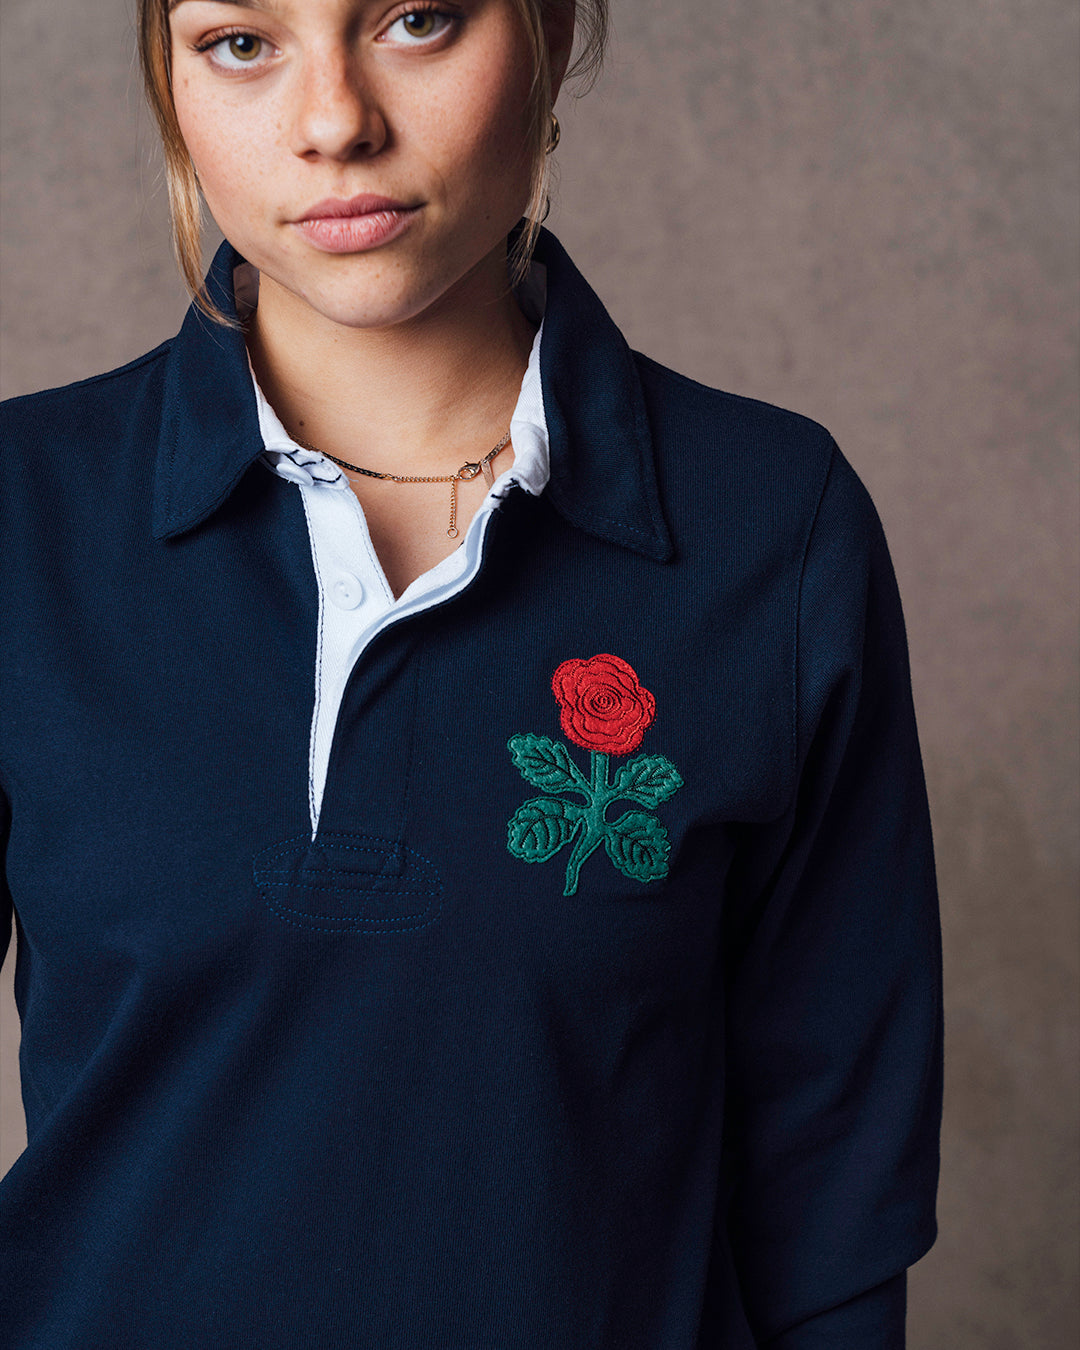 VC: GB-ENG - Women's Vintage Navy Rugby Shirt - England